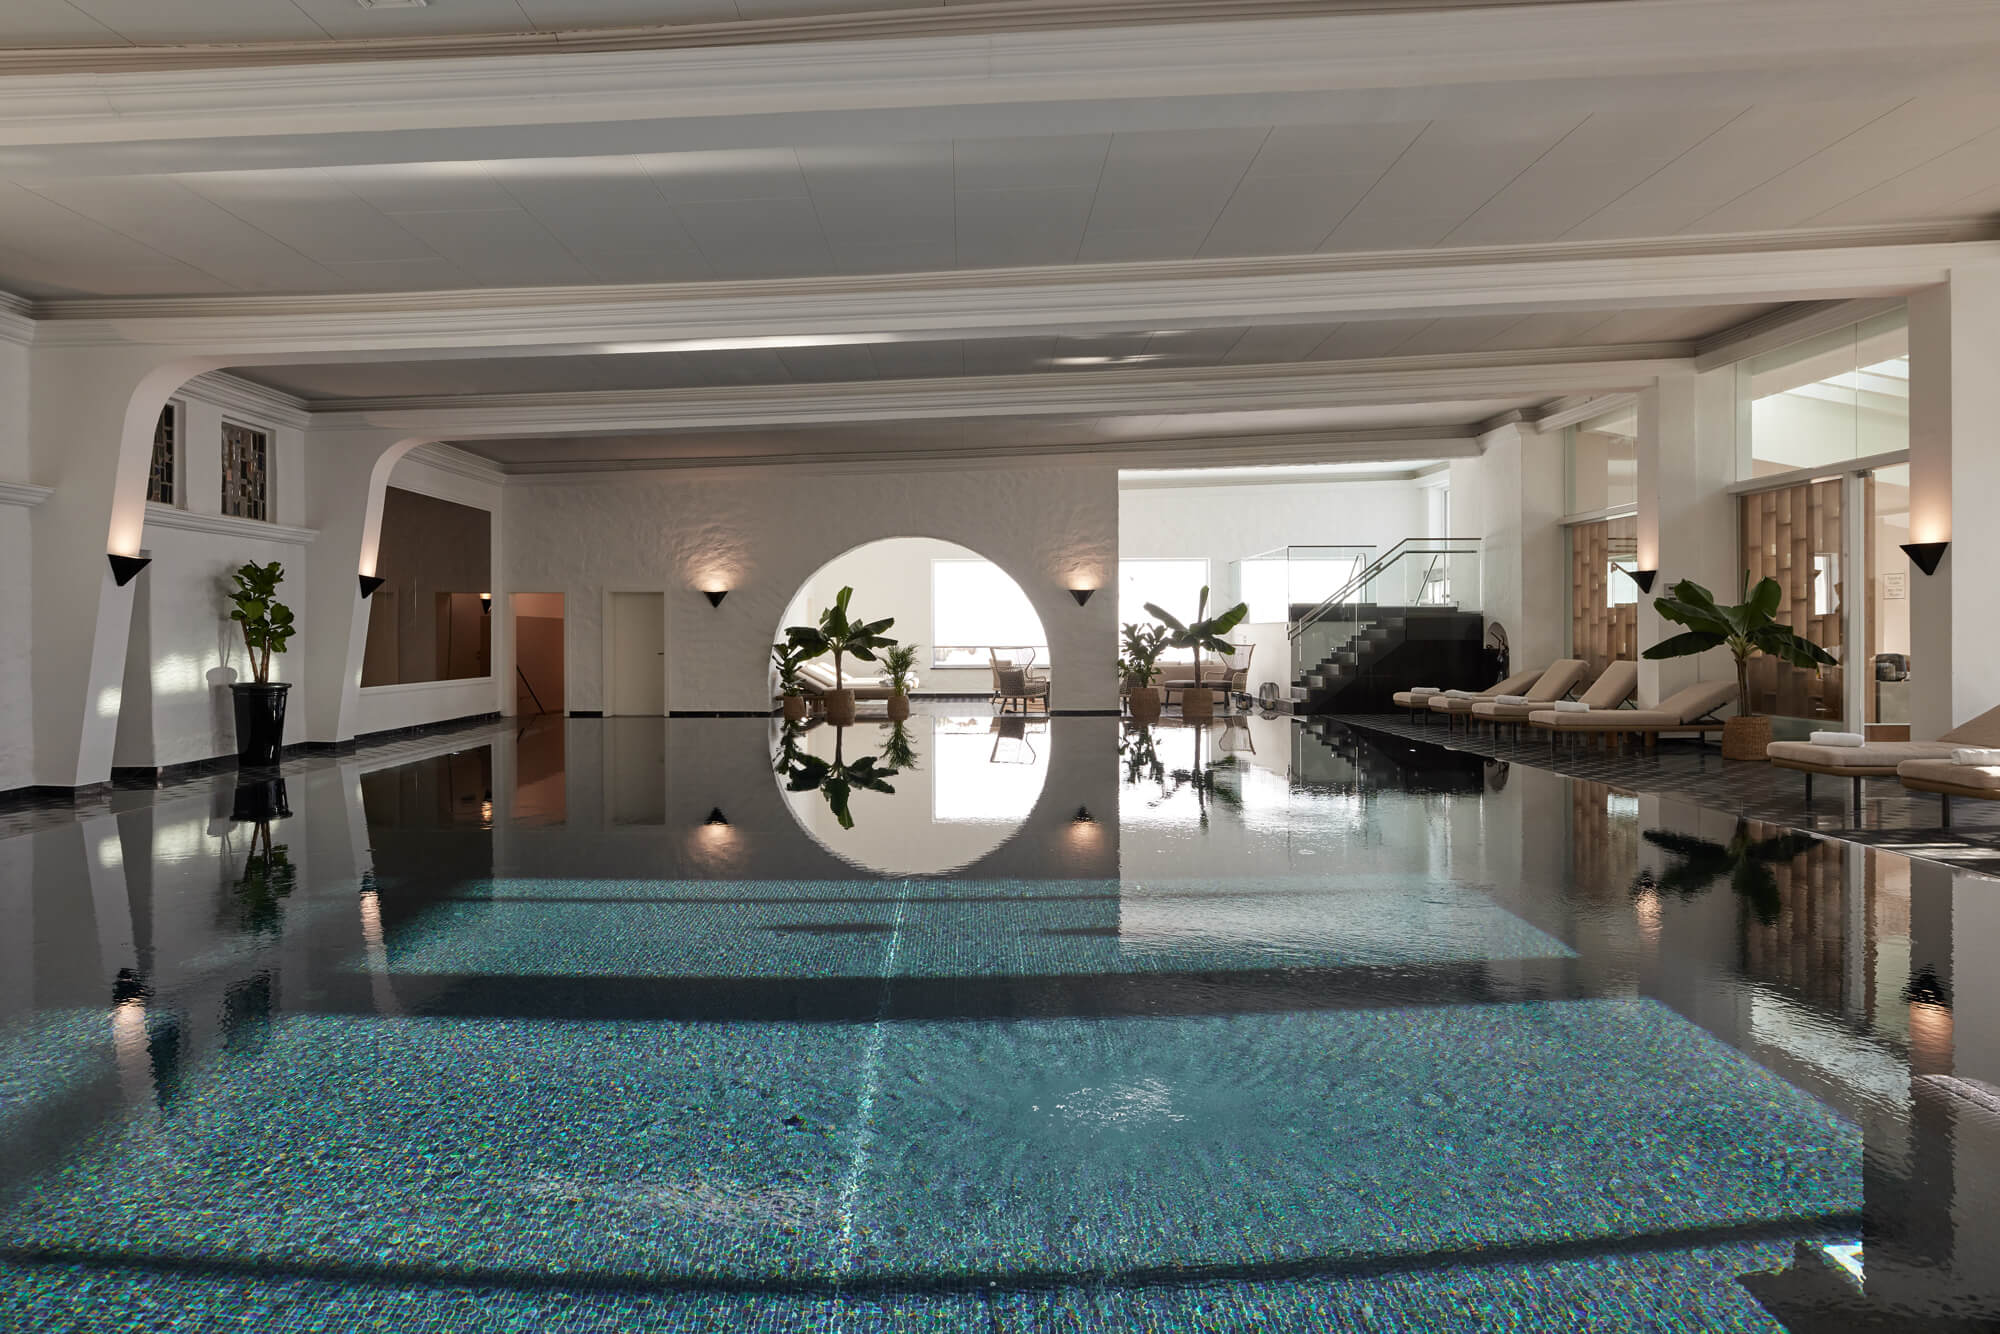 A swimming pool inside a building with SPA & Wellness facilities, treatment rooms, and a view of the